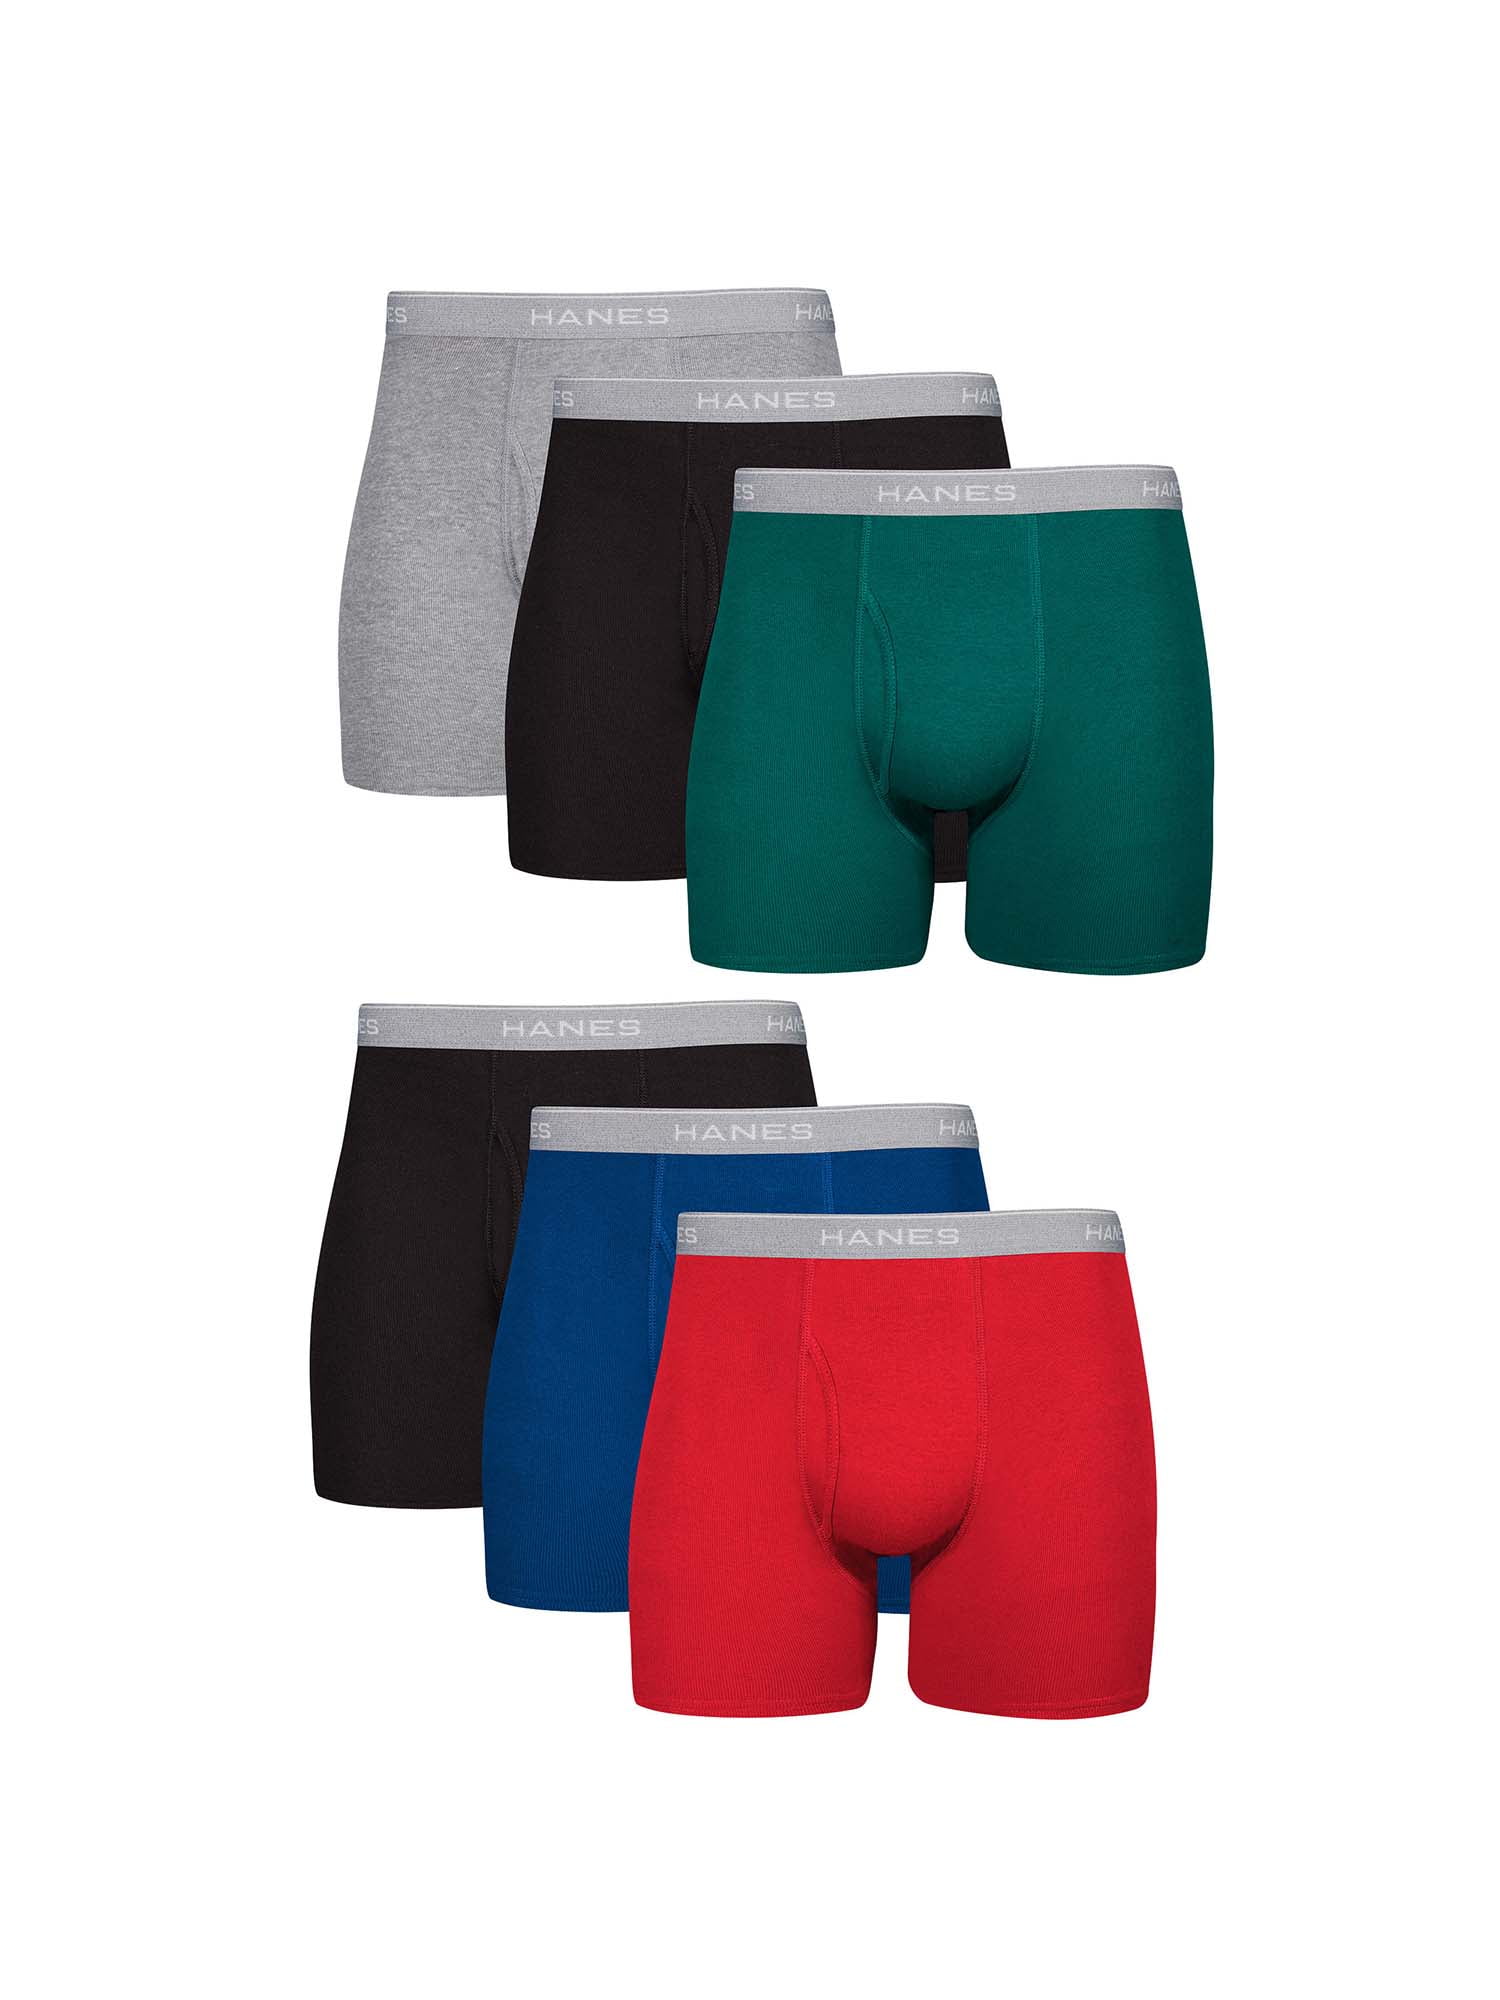 Mens Underwear Boxer Shorts Under Pants Sports Trunks All Sizes Pack of 3,6,9,12 